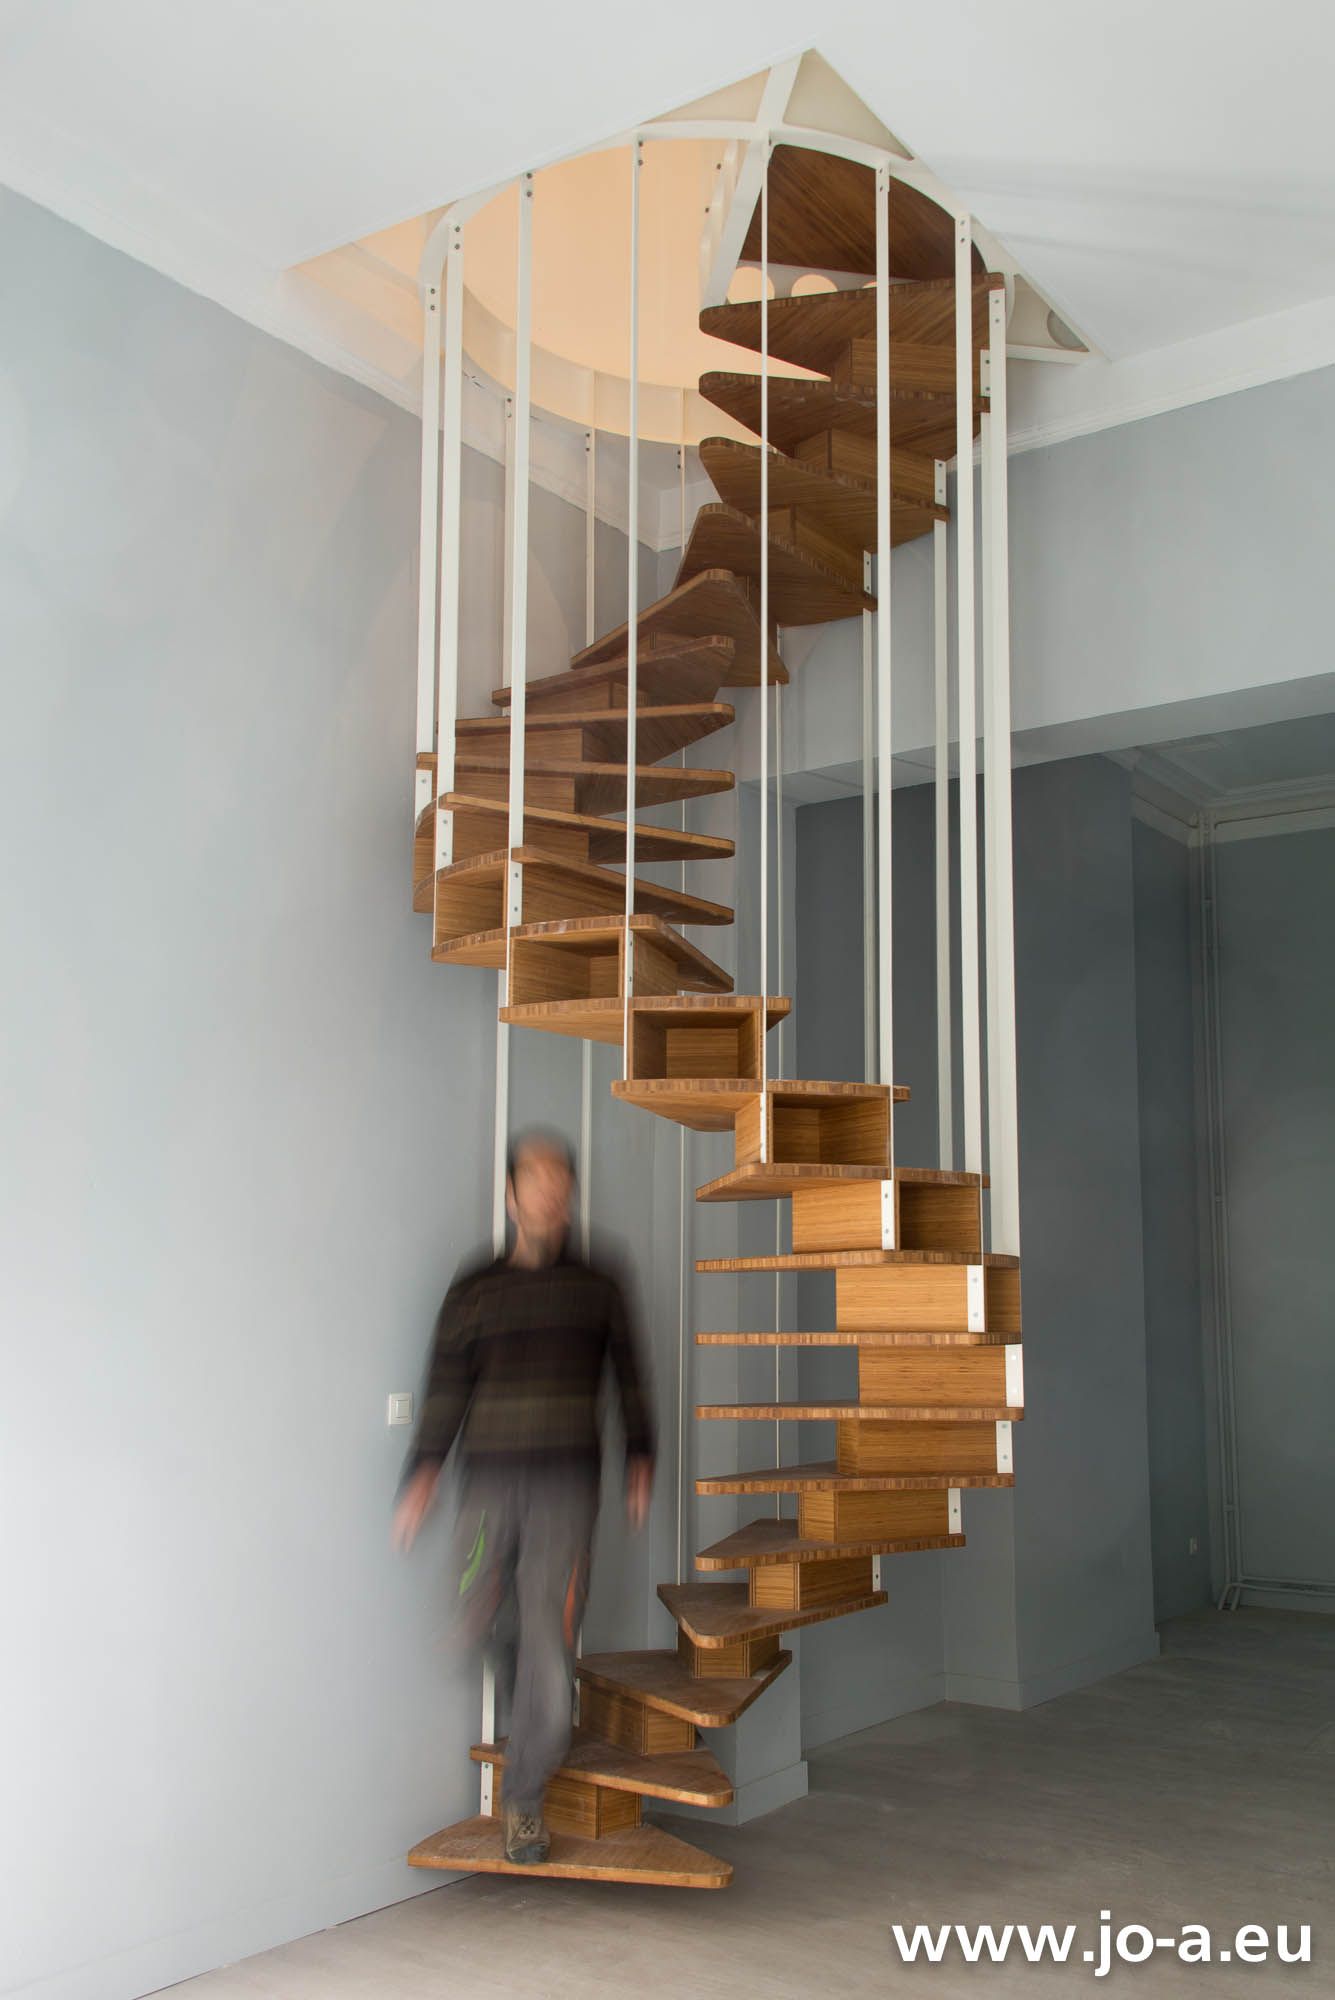 Olmo Spiral staircase at the end of the installation. Design by Jo-a ...